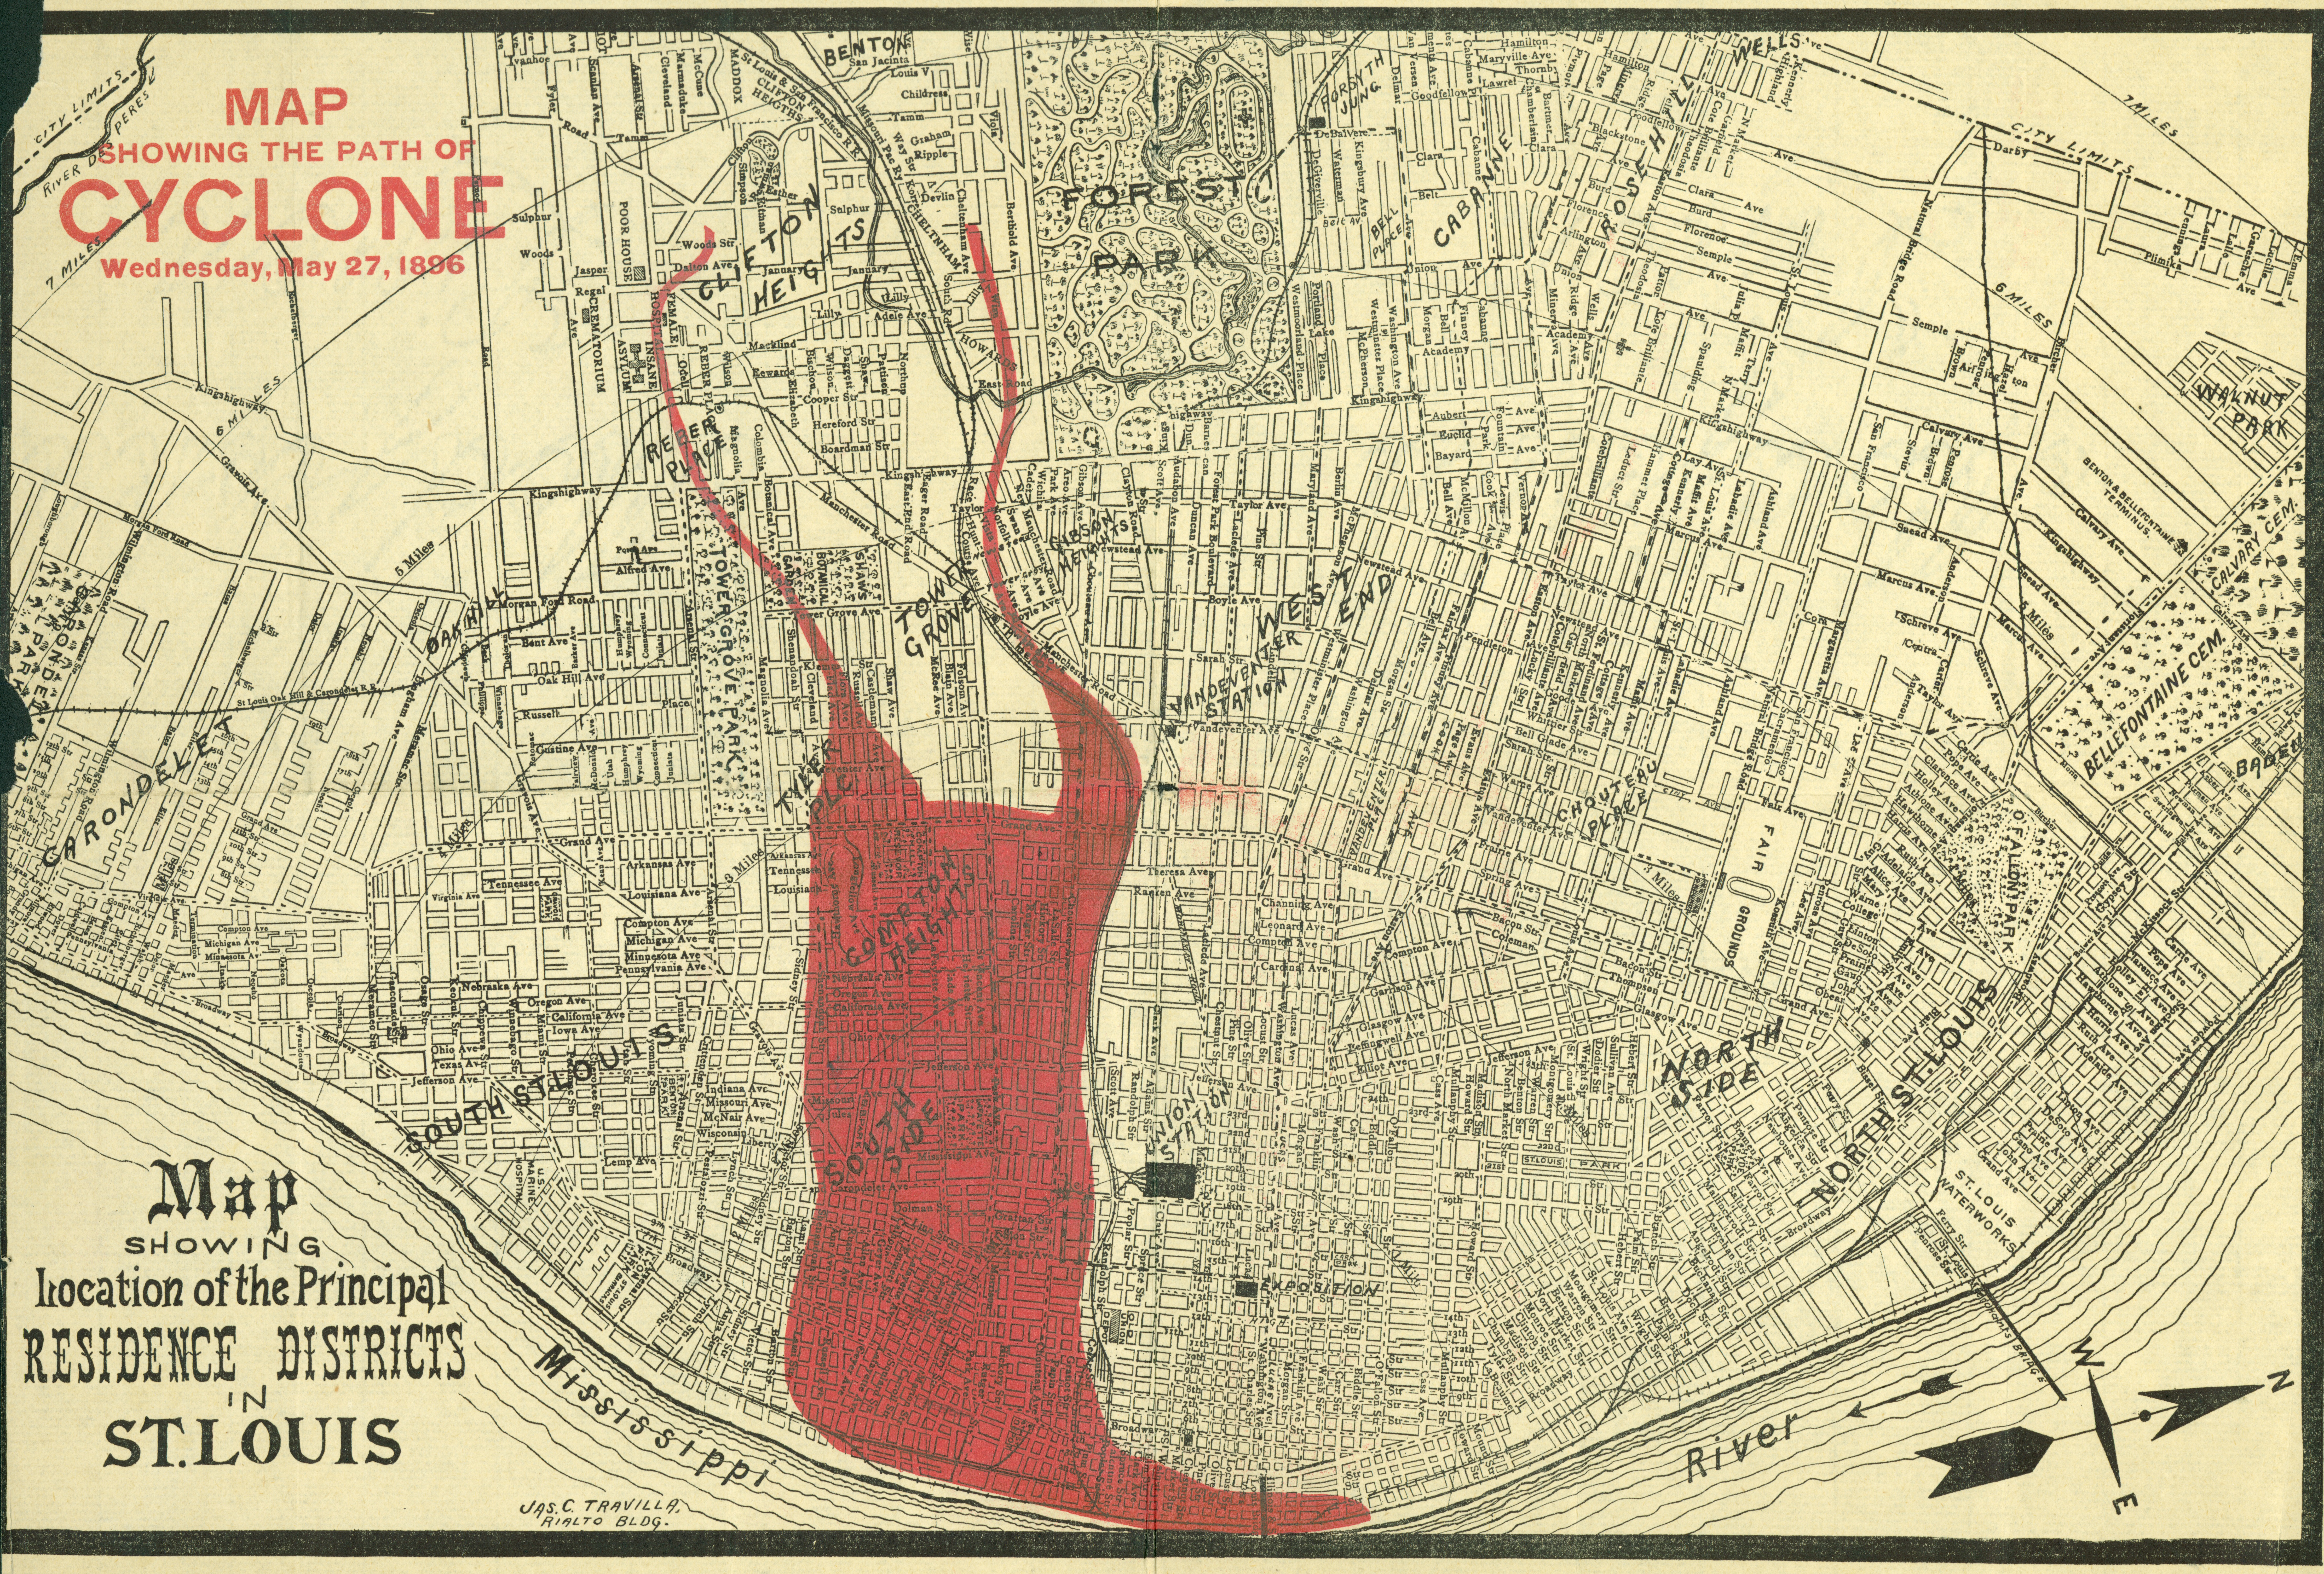 Map showing the path of the Cyclone, Wednesday, May 27, 1896. Superimposed on Map showing location of the Principal Residence Districts in St. Louis.